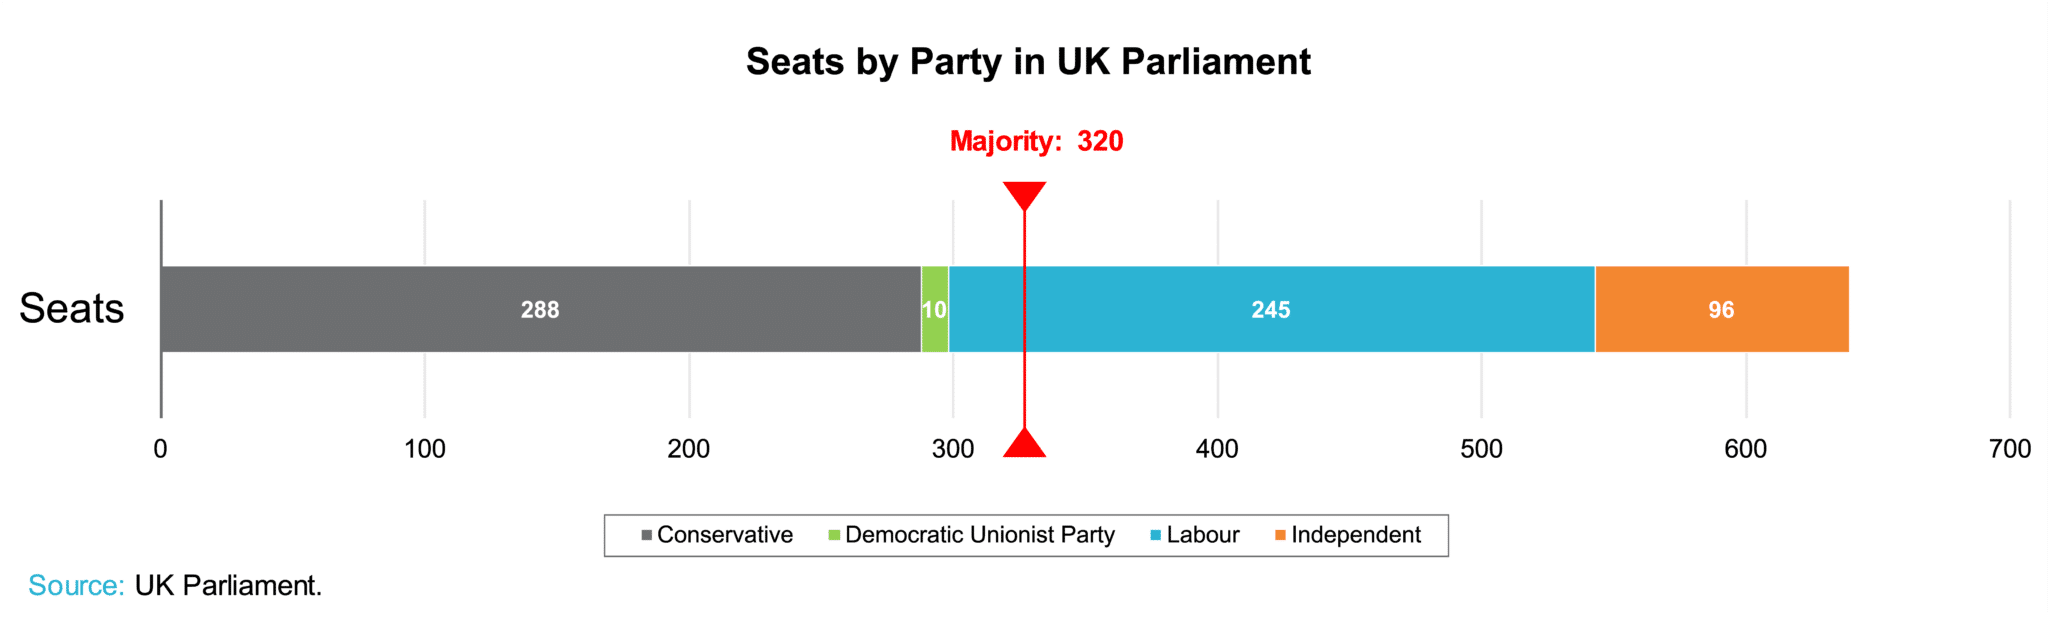 Seats by Party in UK Parliament